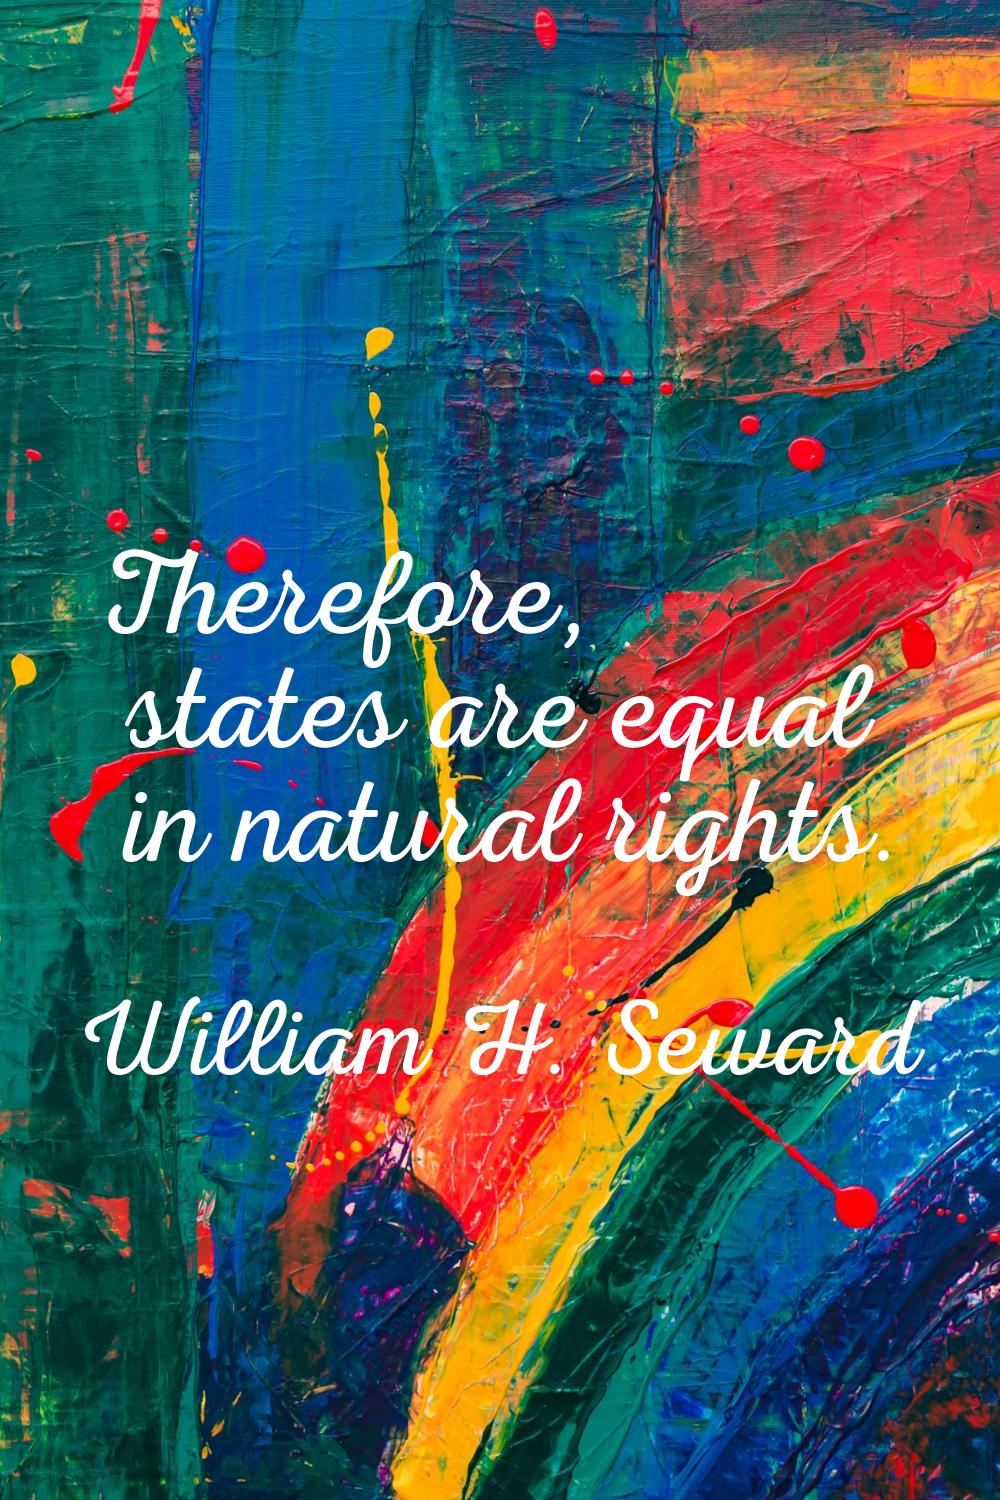 Therefore, states are equal in natural rights.